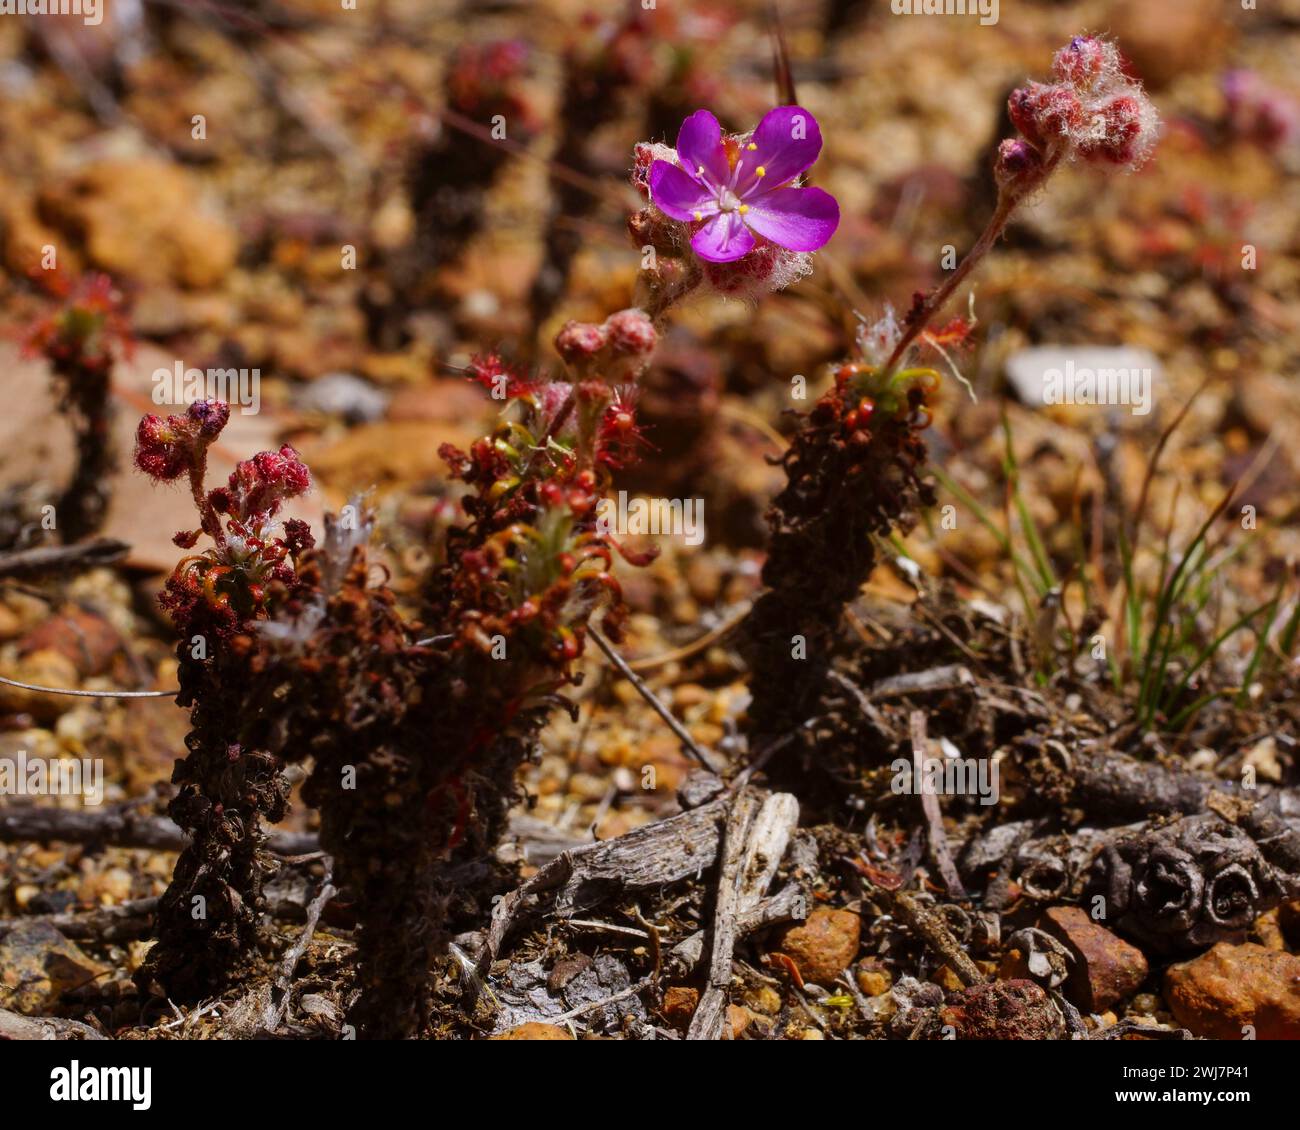 Carnivorous pygmy sundews Drosera lasiantha with long stems and pink flower, growing in laterite, Western Australia Stock Photo